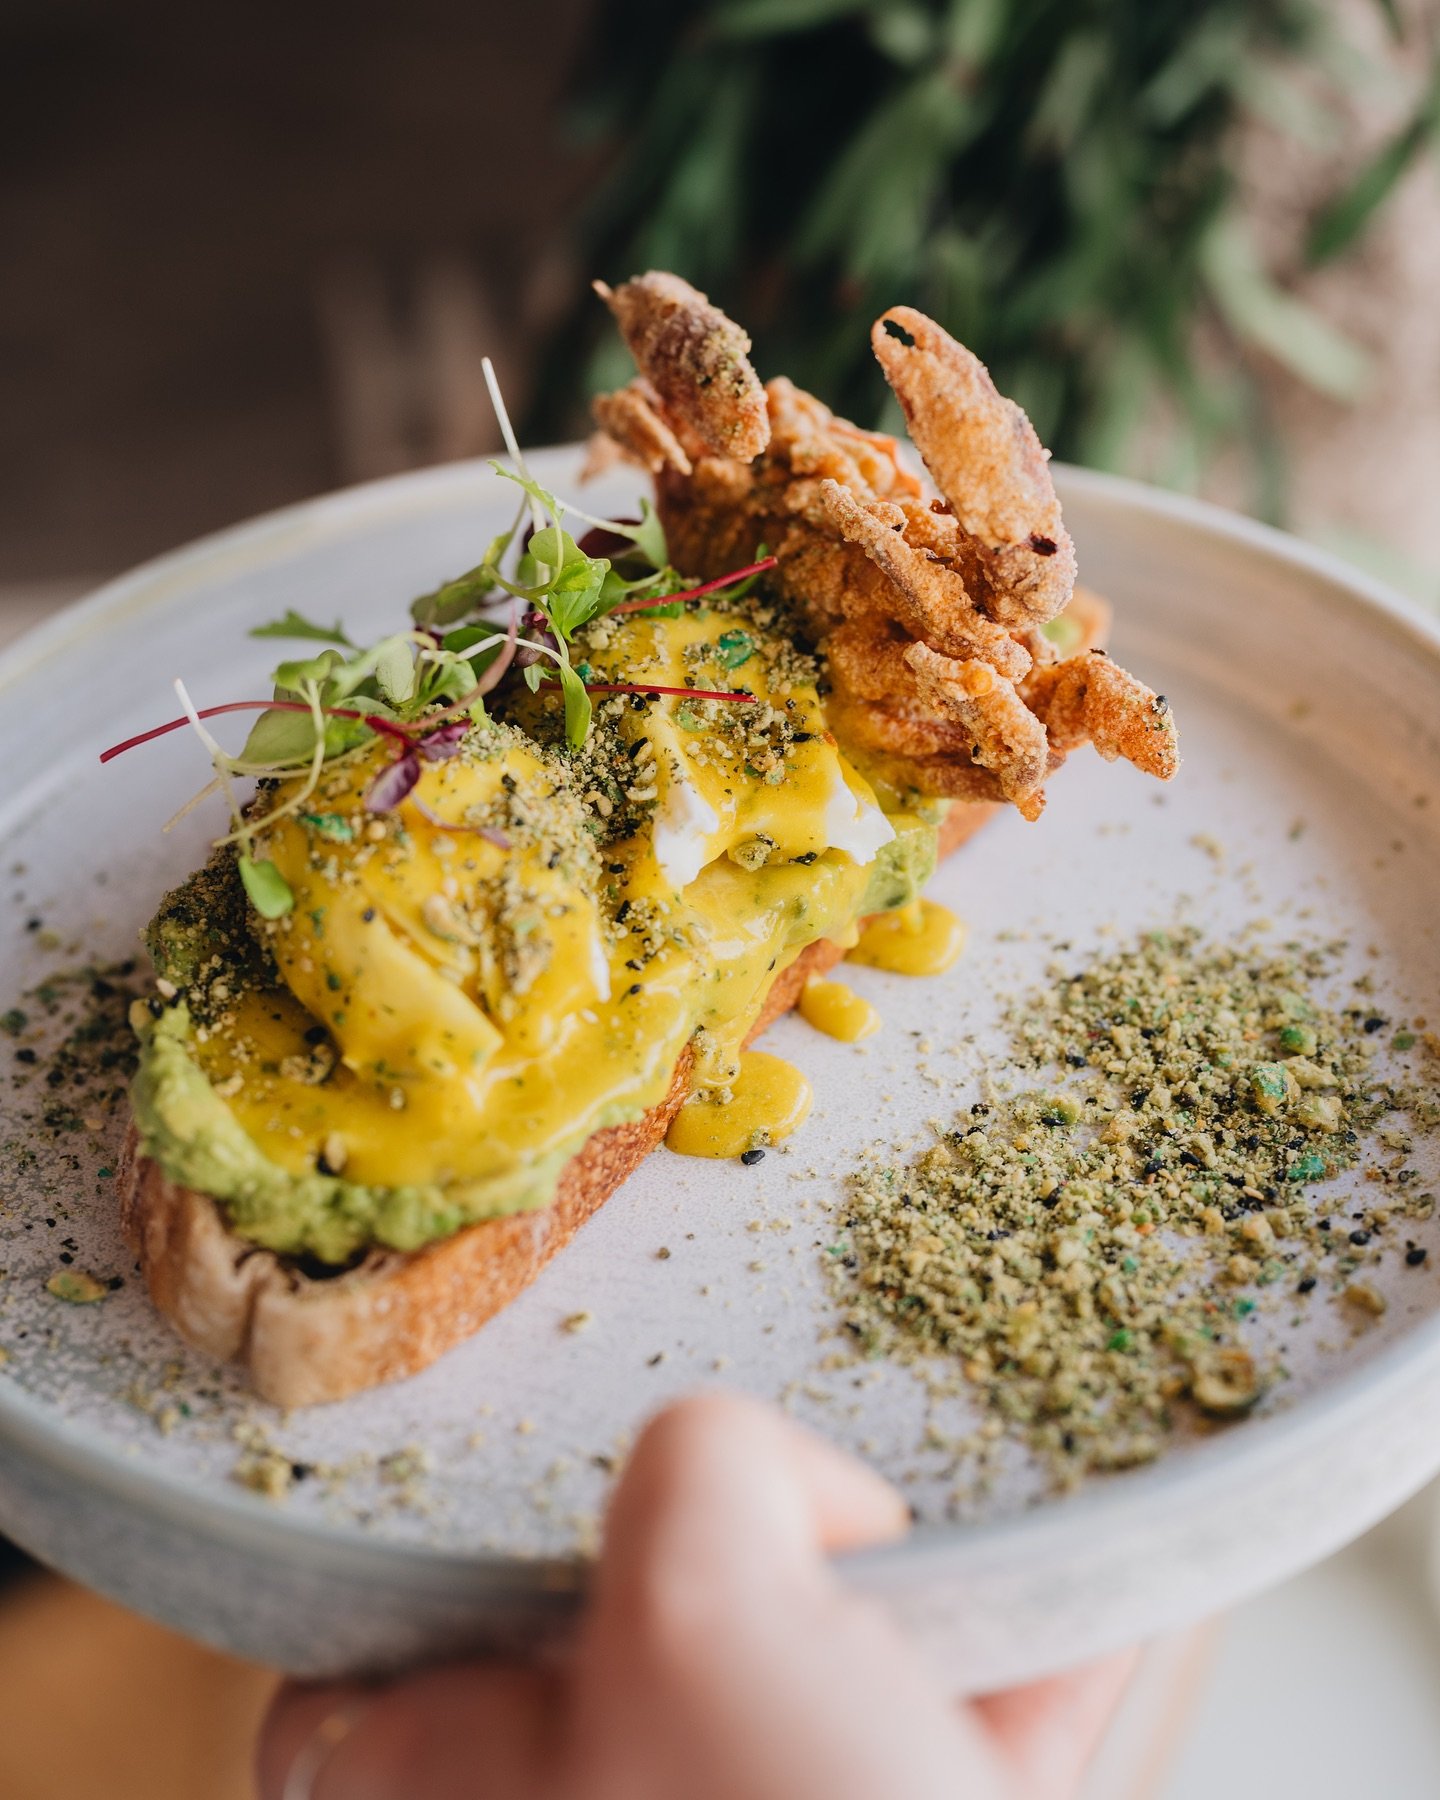 Our Eggs California in Brigg always go down a treat! Deliciously prepared soft shell crab with our signature herby hollandaise over perfectly poached eggs nestled into fresh avocado on toast 🦀 💚